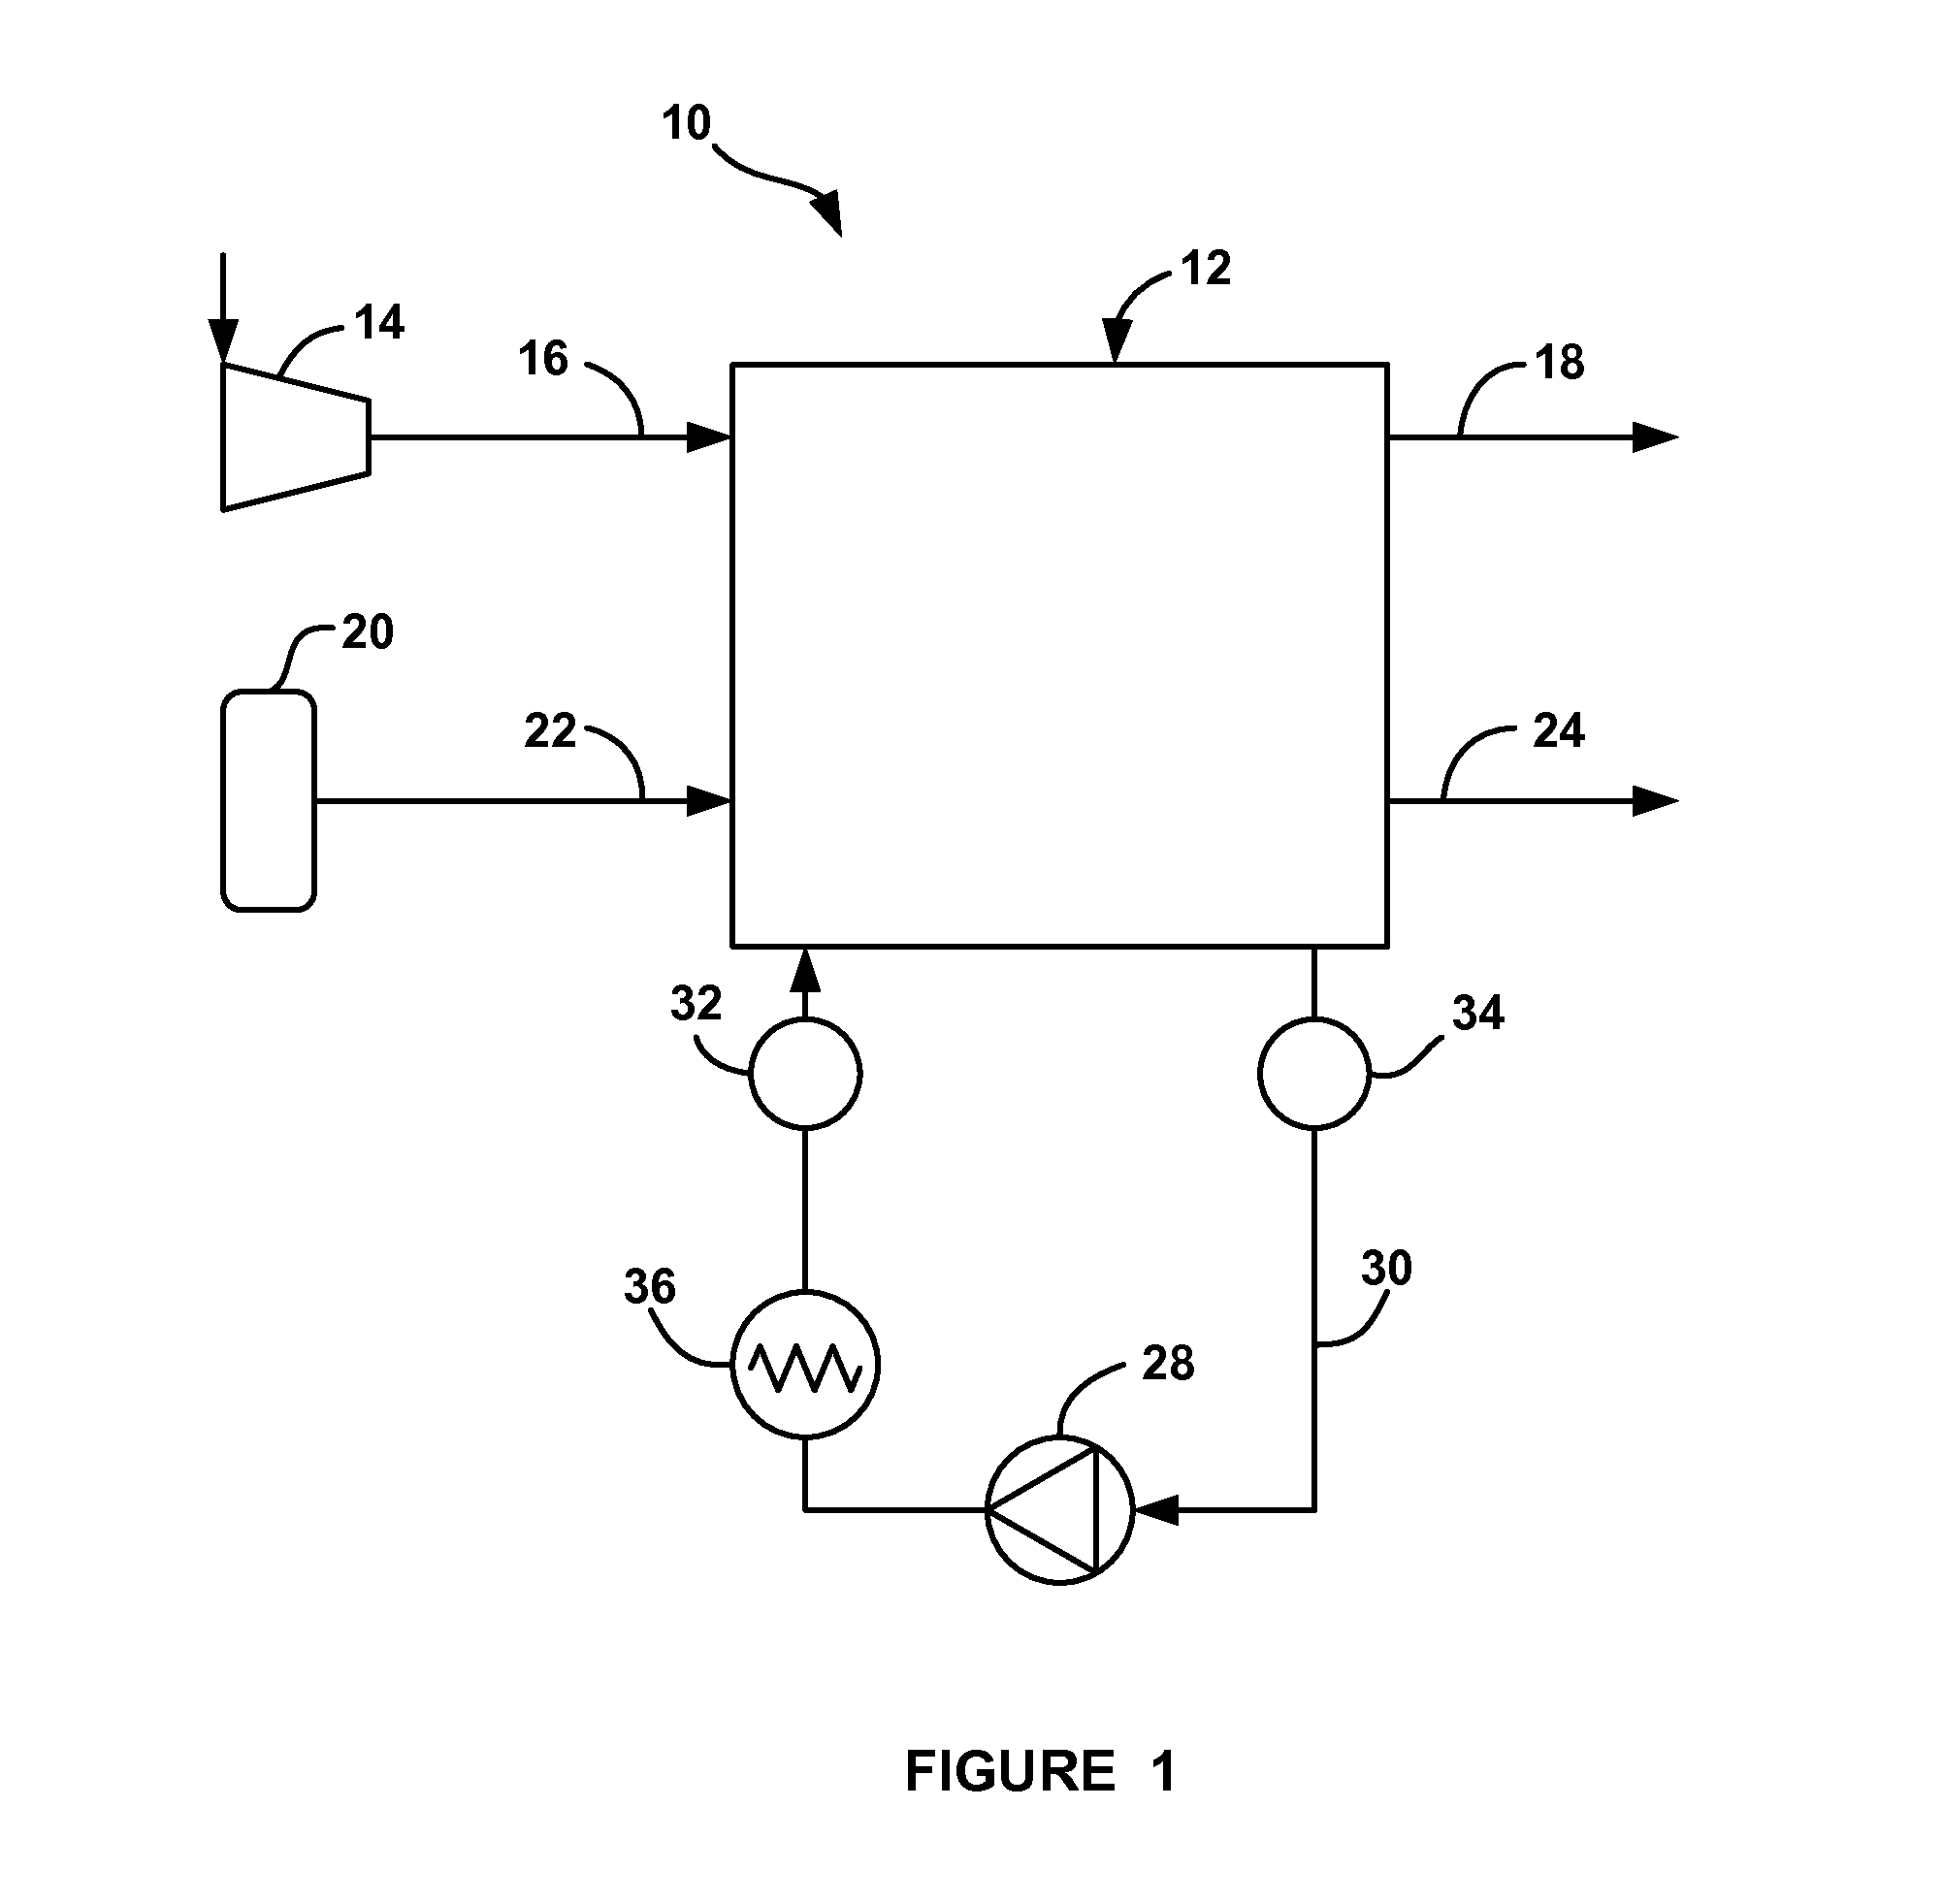 Method to thaw frozen coolant in a fuel cell system